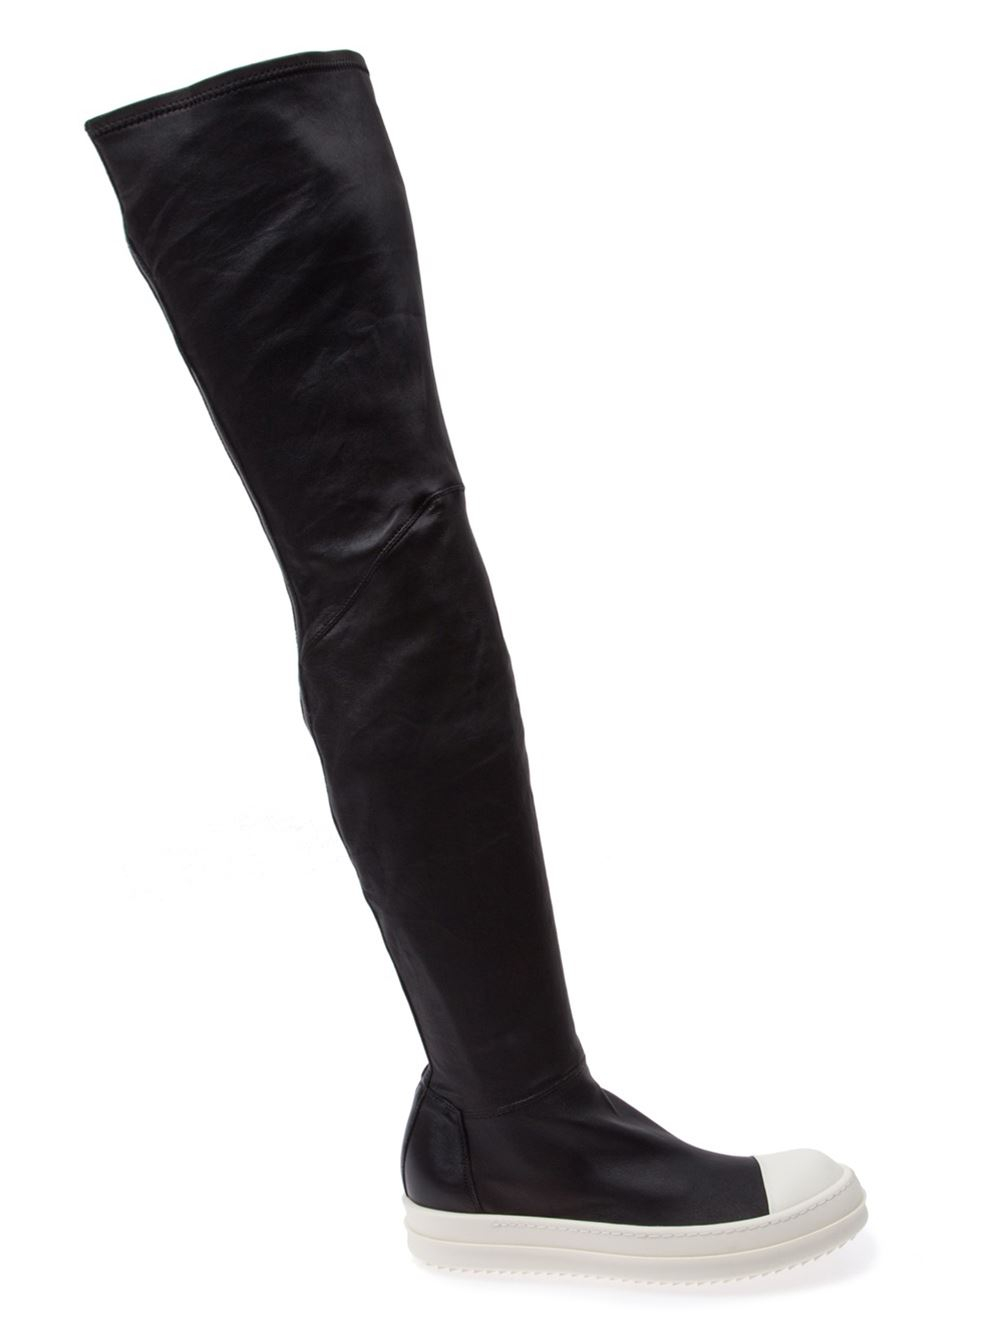 Lyst - Rick Owens Thigh High Sneaker Boots in Black